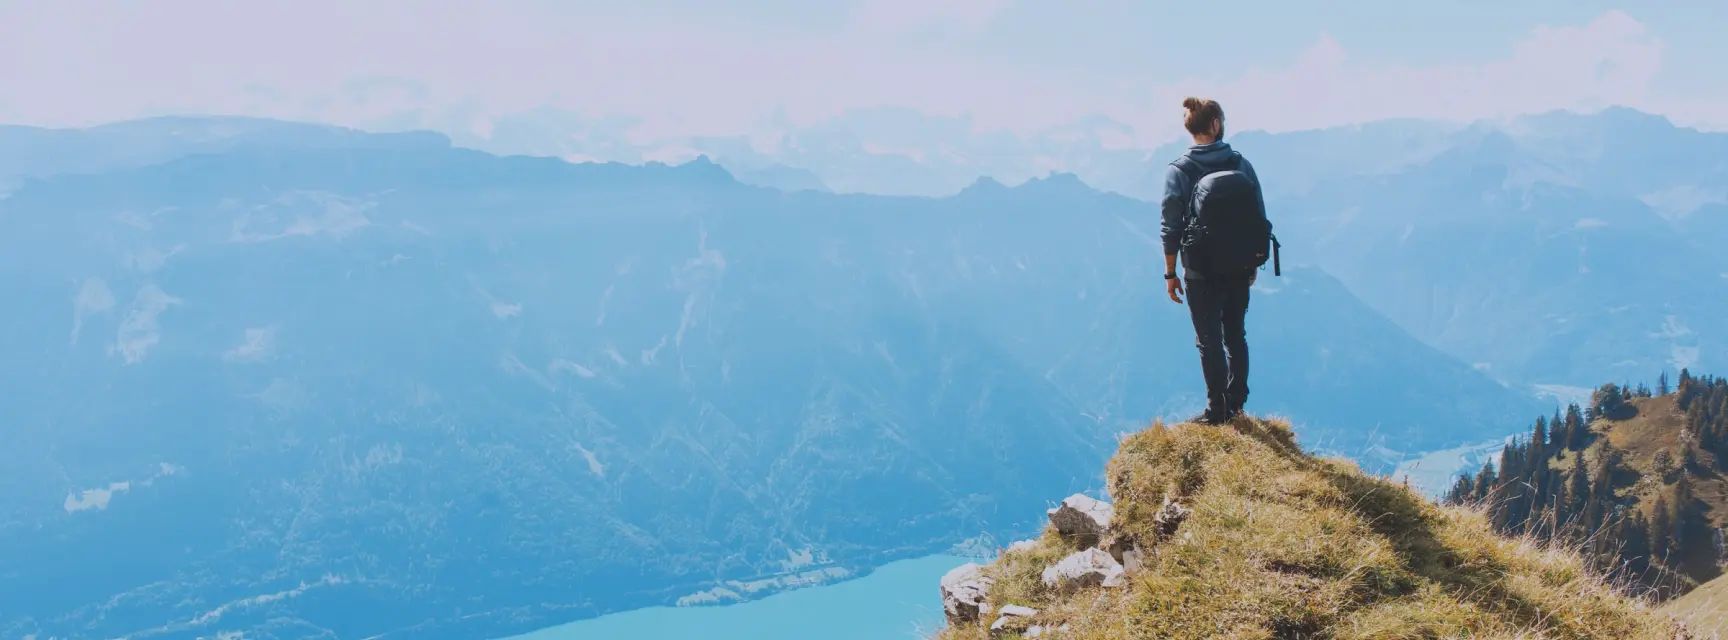 Mountaineer standing on top of a peak overlooking the lake and mountains